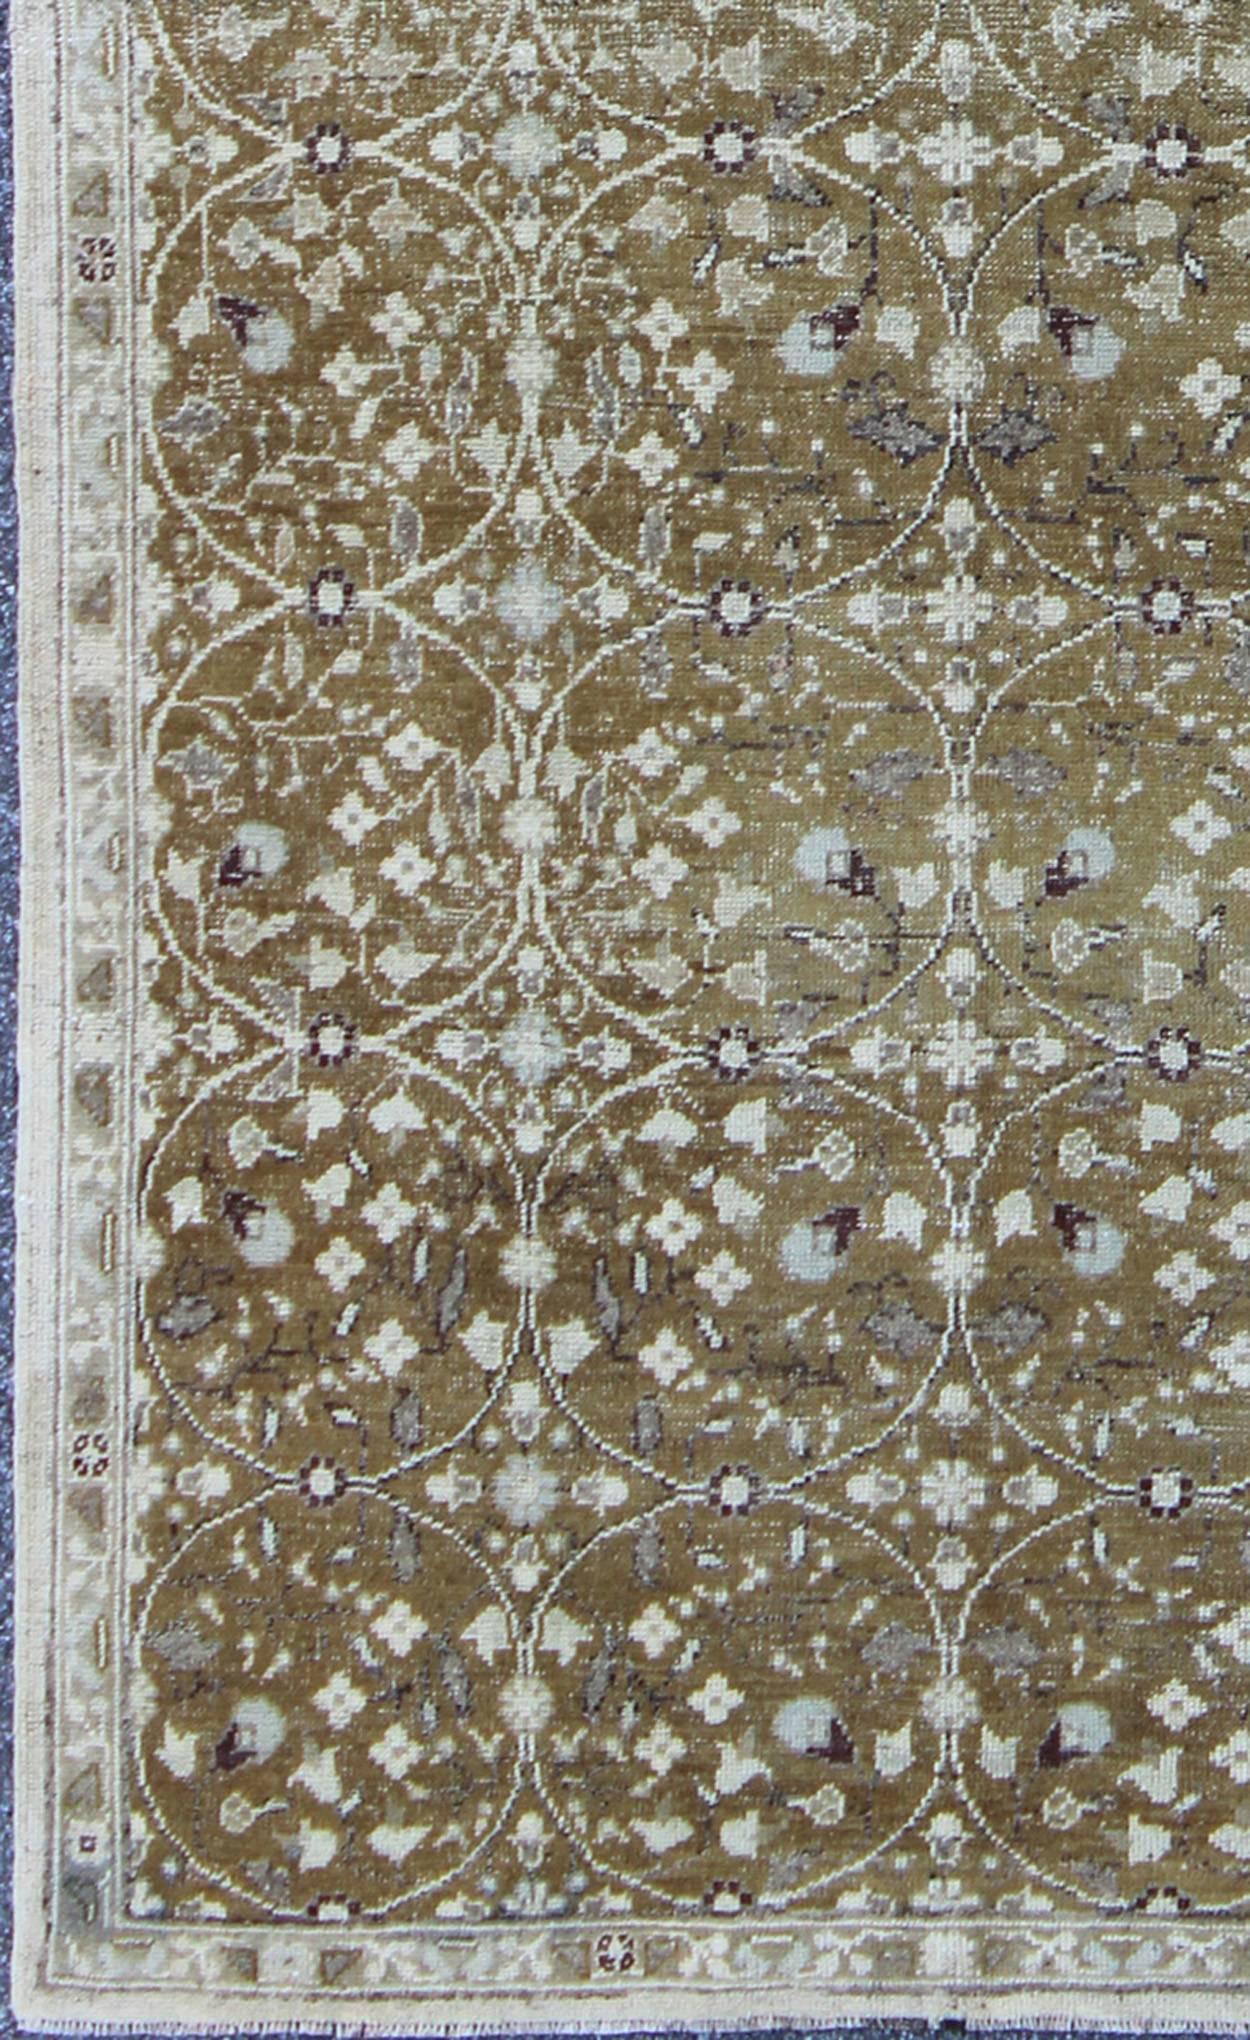 Antique All-Over Design Oushak Rug with Flowers in Ivory and Olive Green, rug EN-141498 country of origin / type: Turkey / Oushak, circa second quarter of 20th Century.                      

Produced in 1930's Turkey, this antique Oushak is